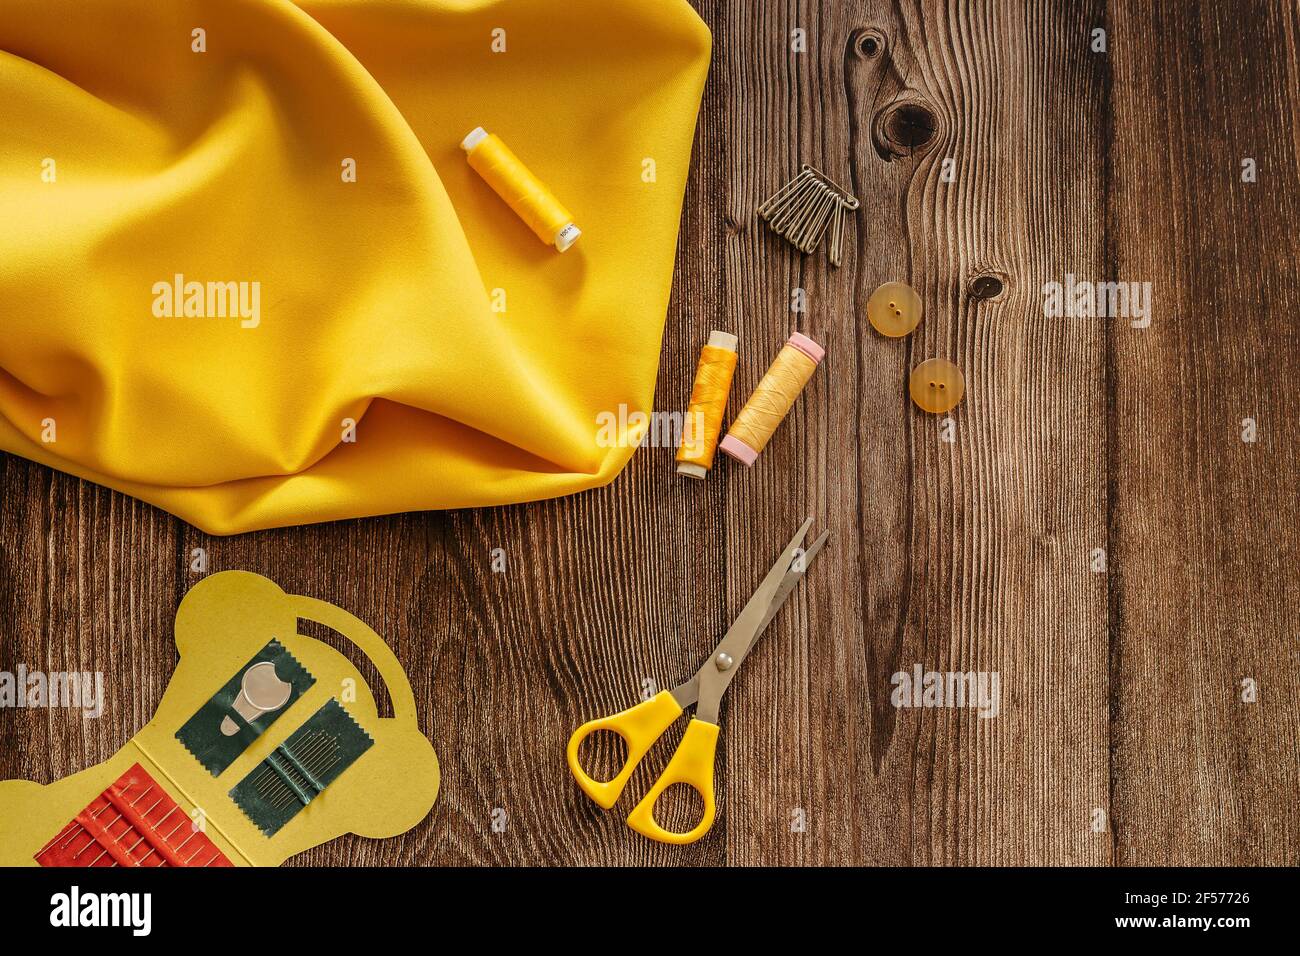 Sewing accessories and yellow fabric on wooden table. Sewing threads, needles, pins, buttons and scissors. Top view, flat lay concept. Accessories Stock Photo